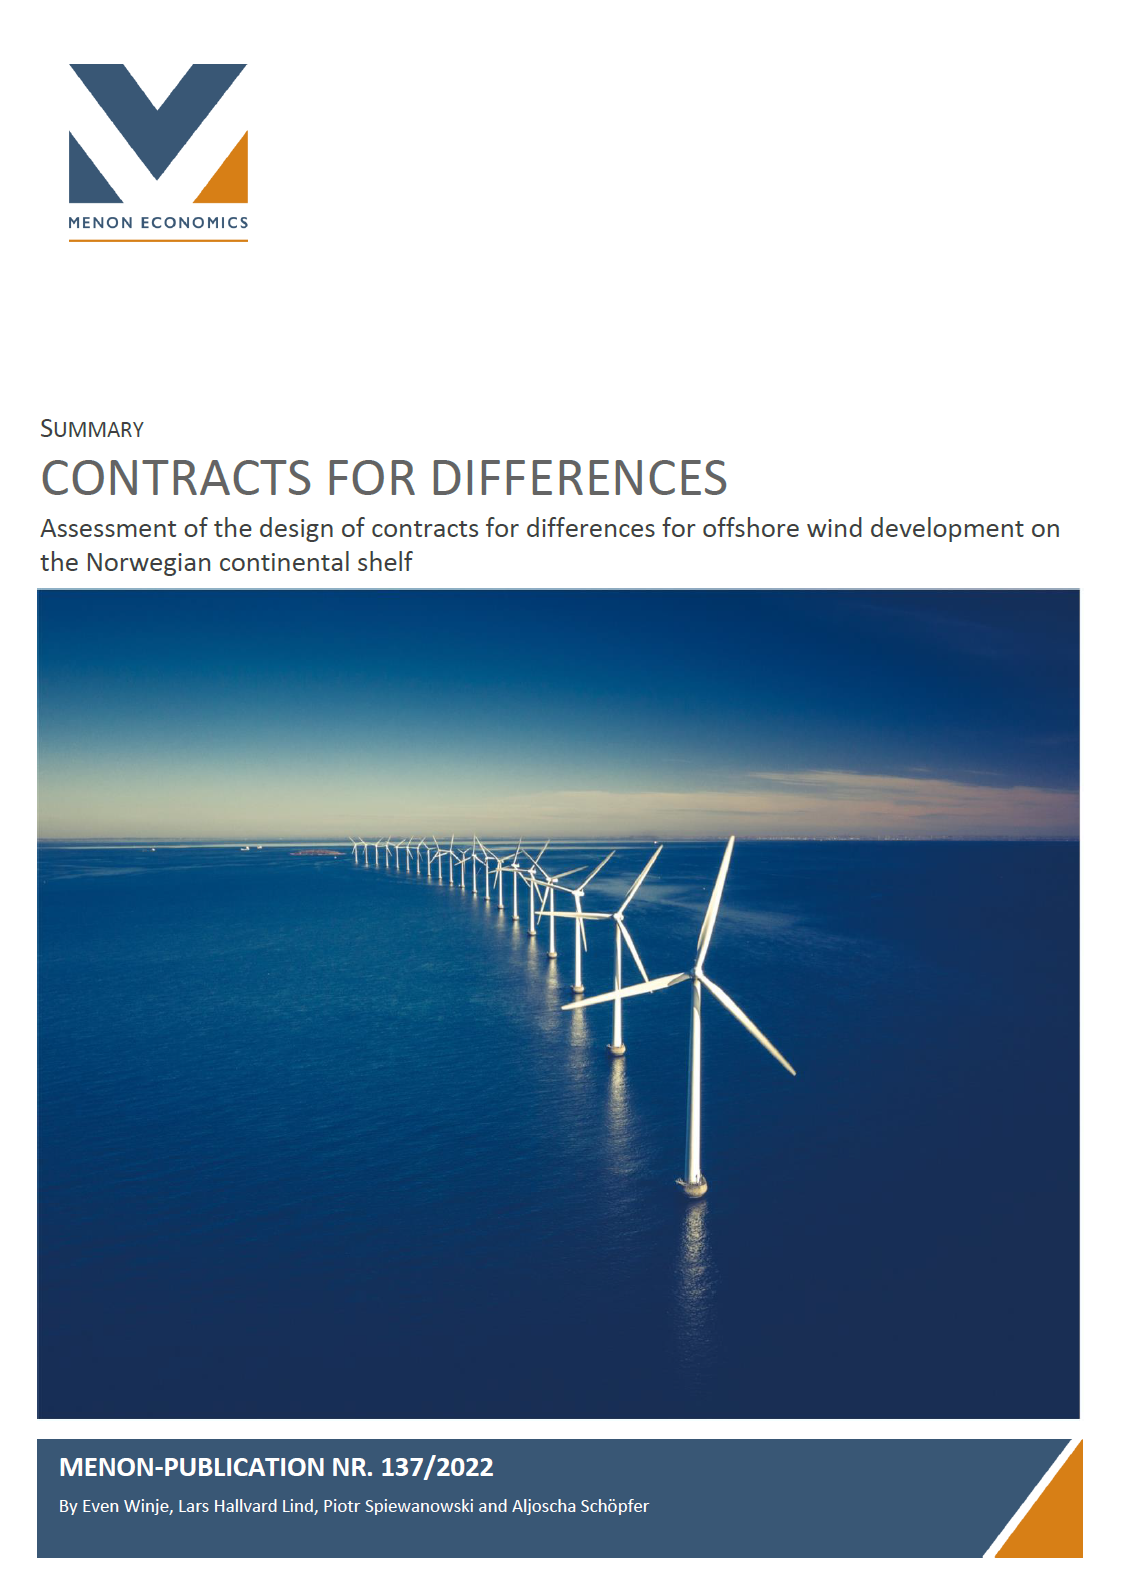 Contract for difference – assessment of the design for offshore wind development in Norway